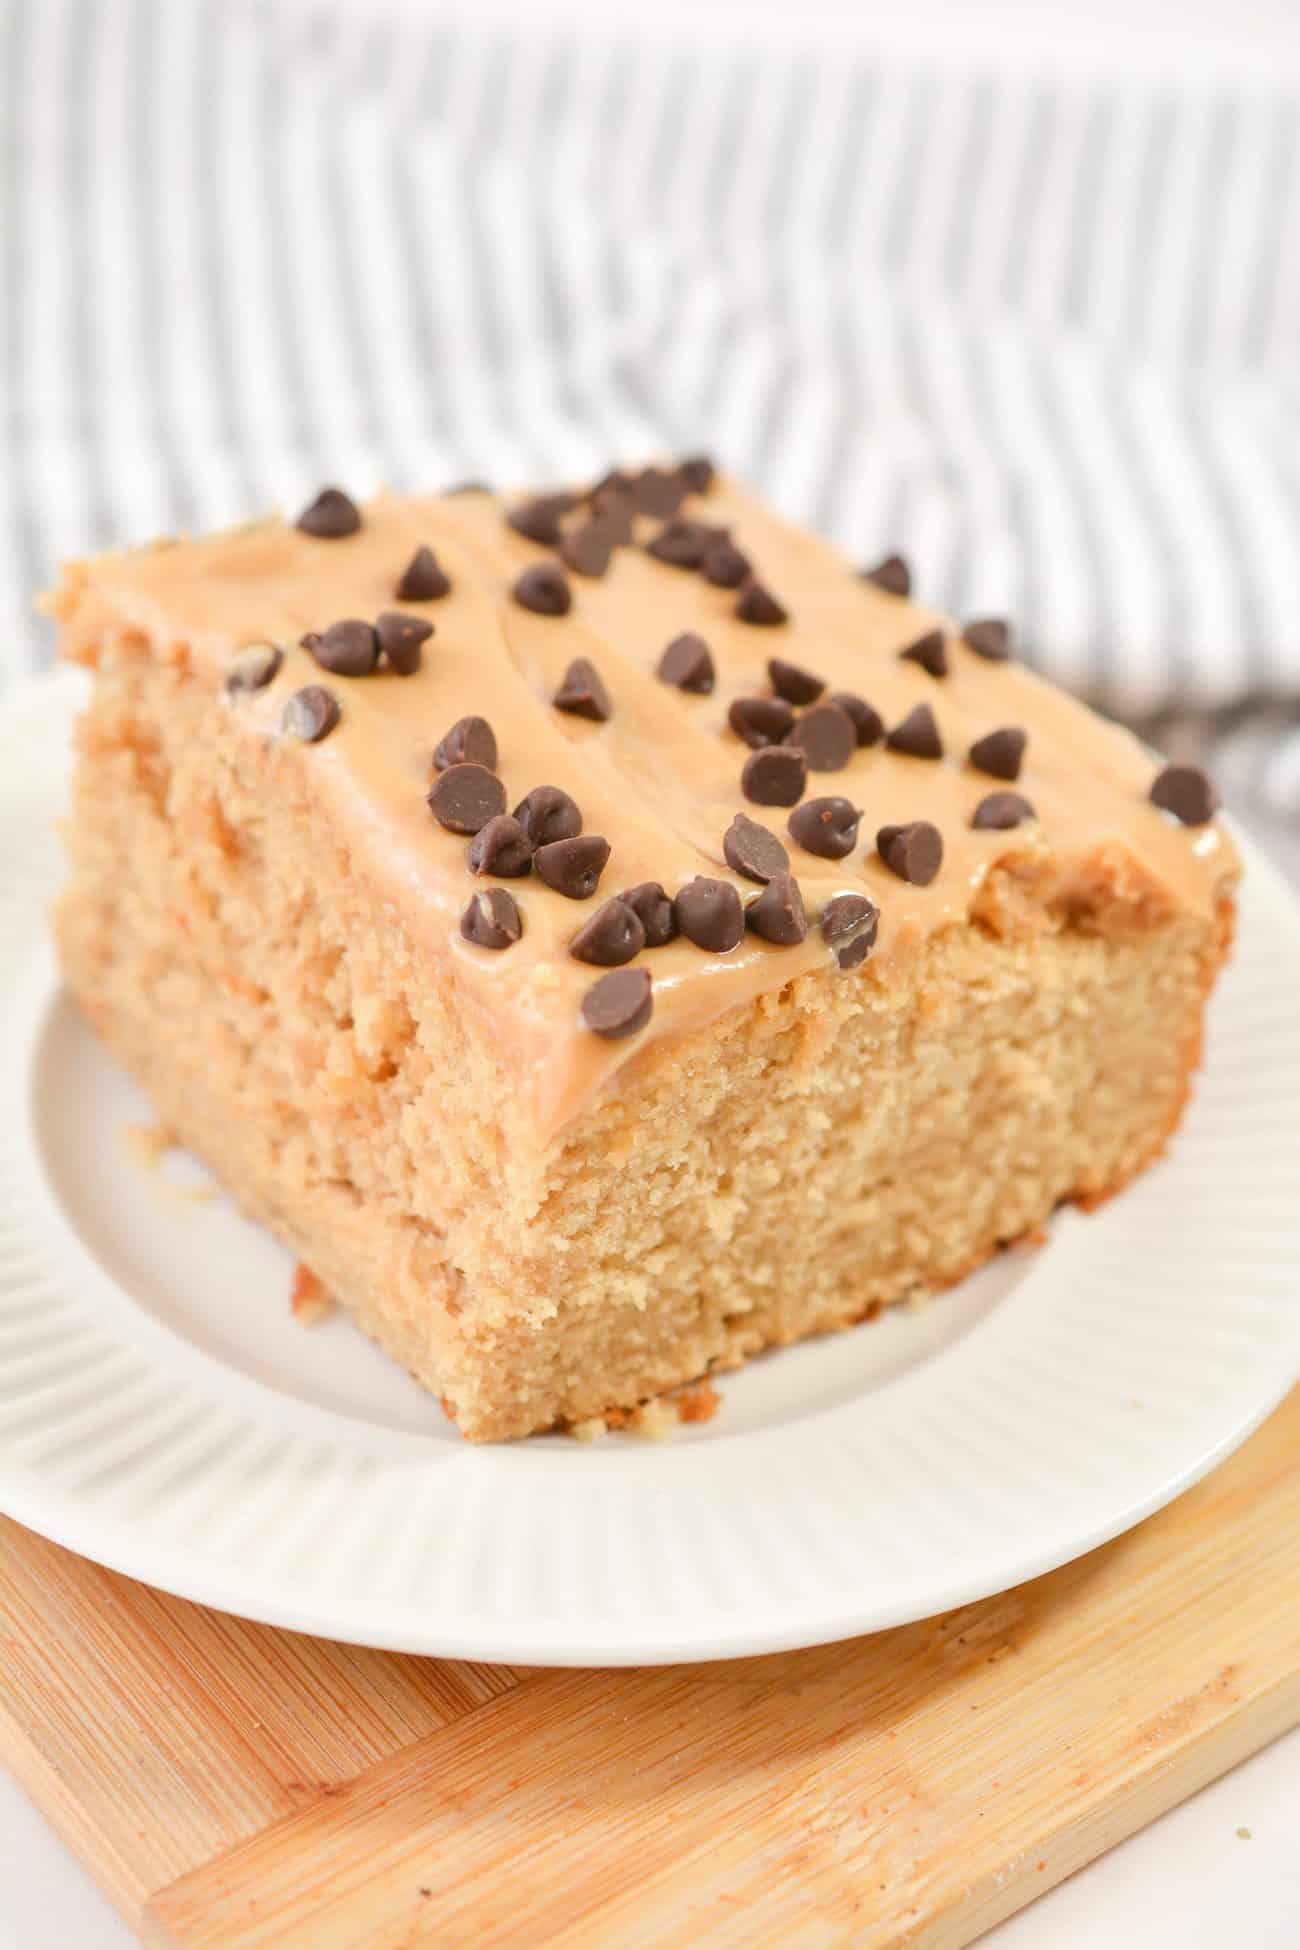 Peanut Butter Cake with Peanut Butter Frosting